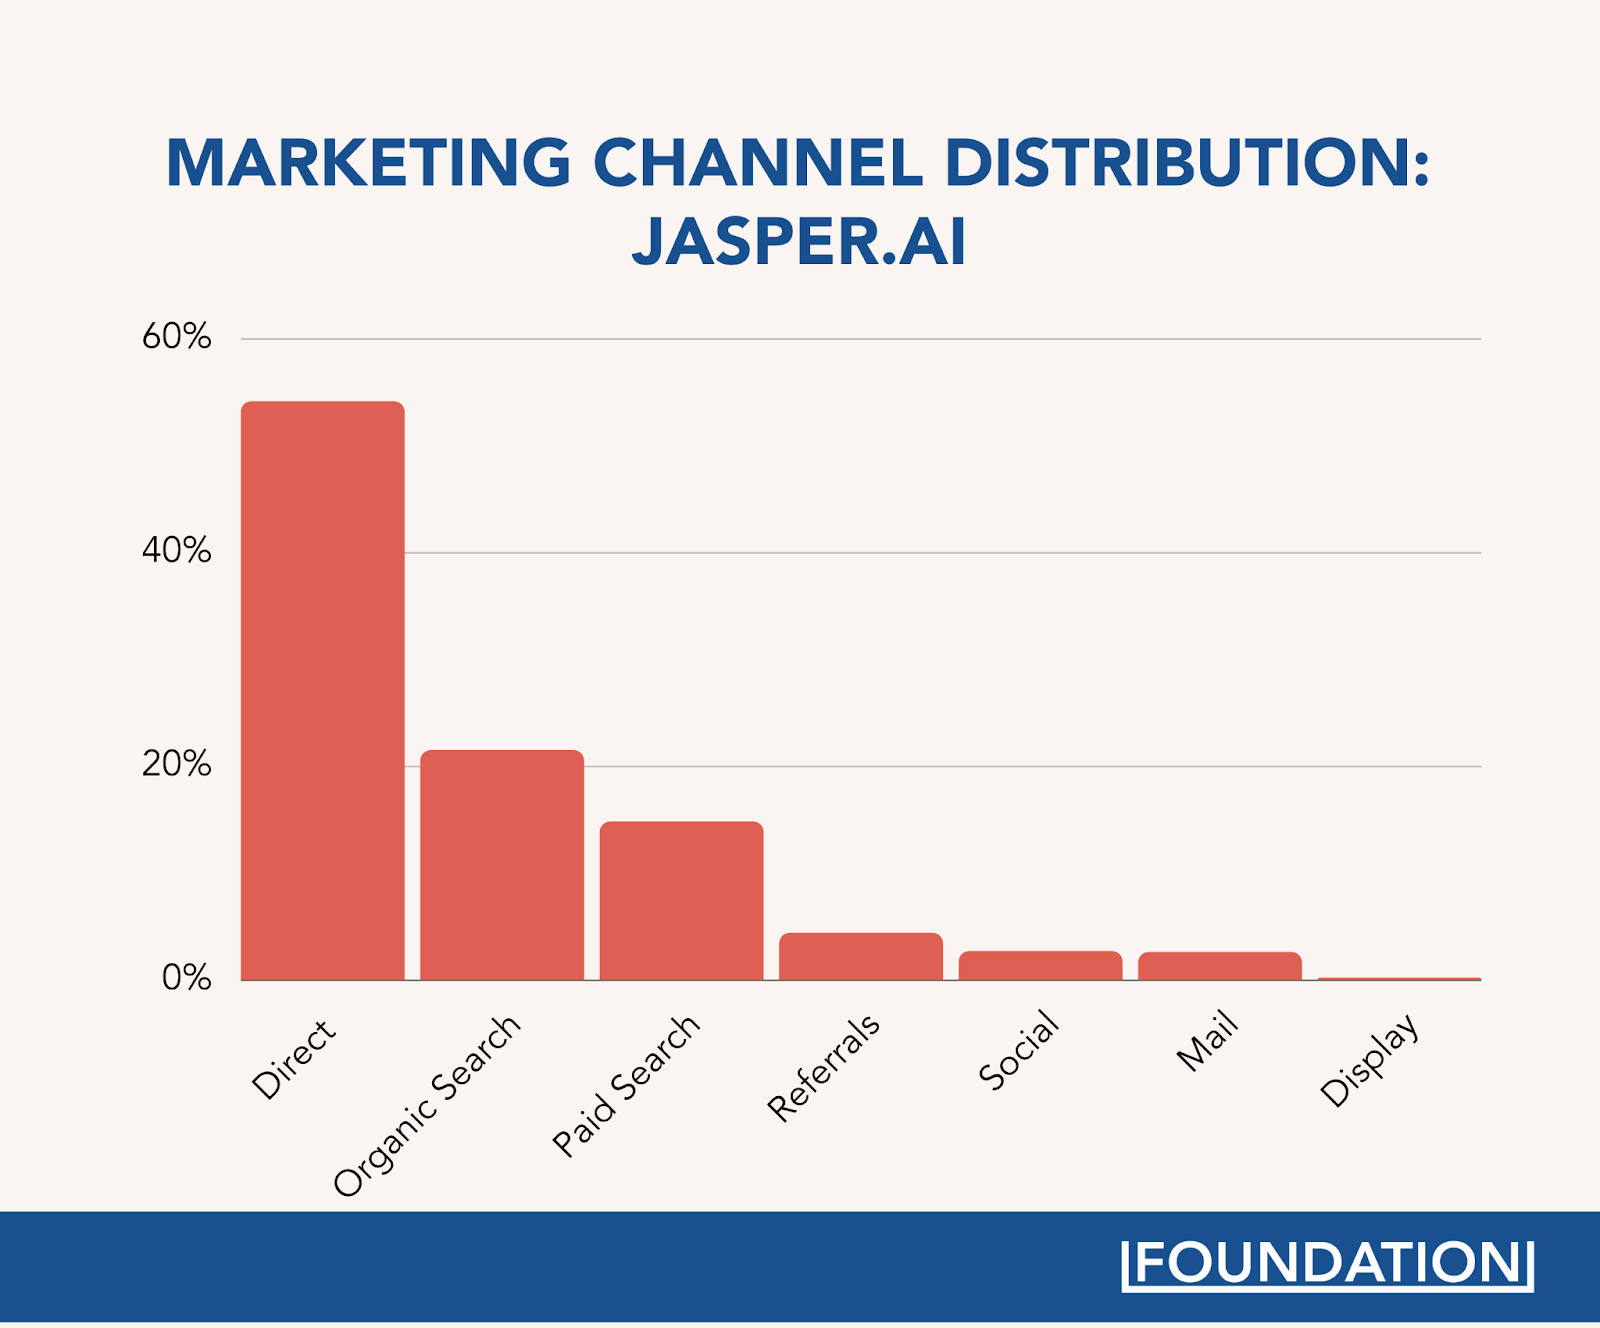 Jasper AI's marketing channel distribution is lead by direct and organic traffic